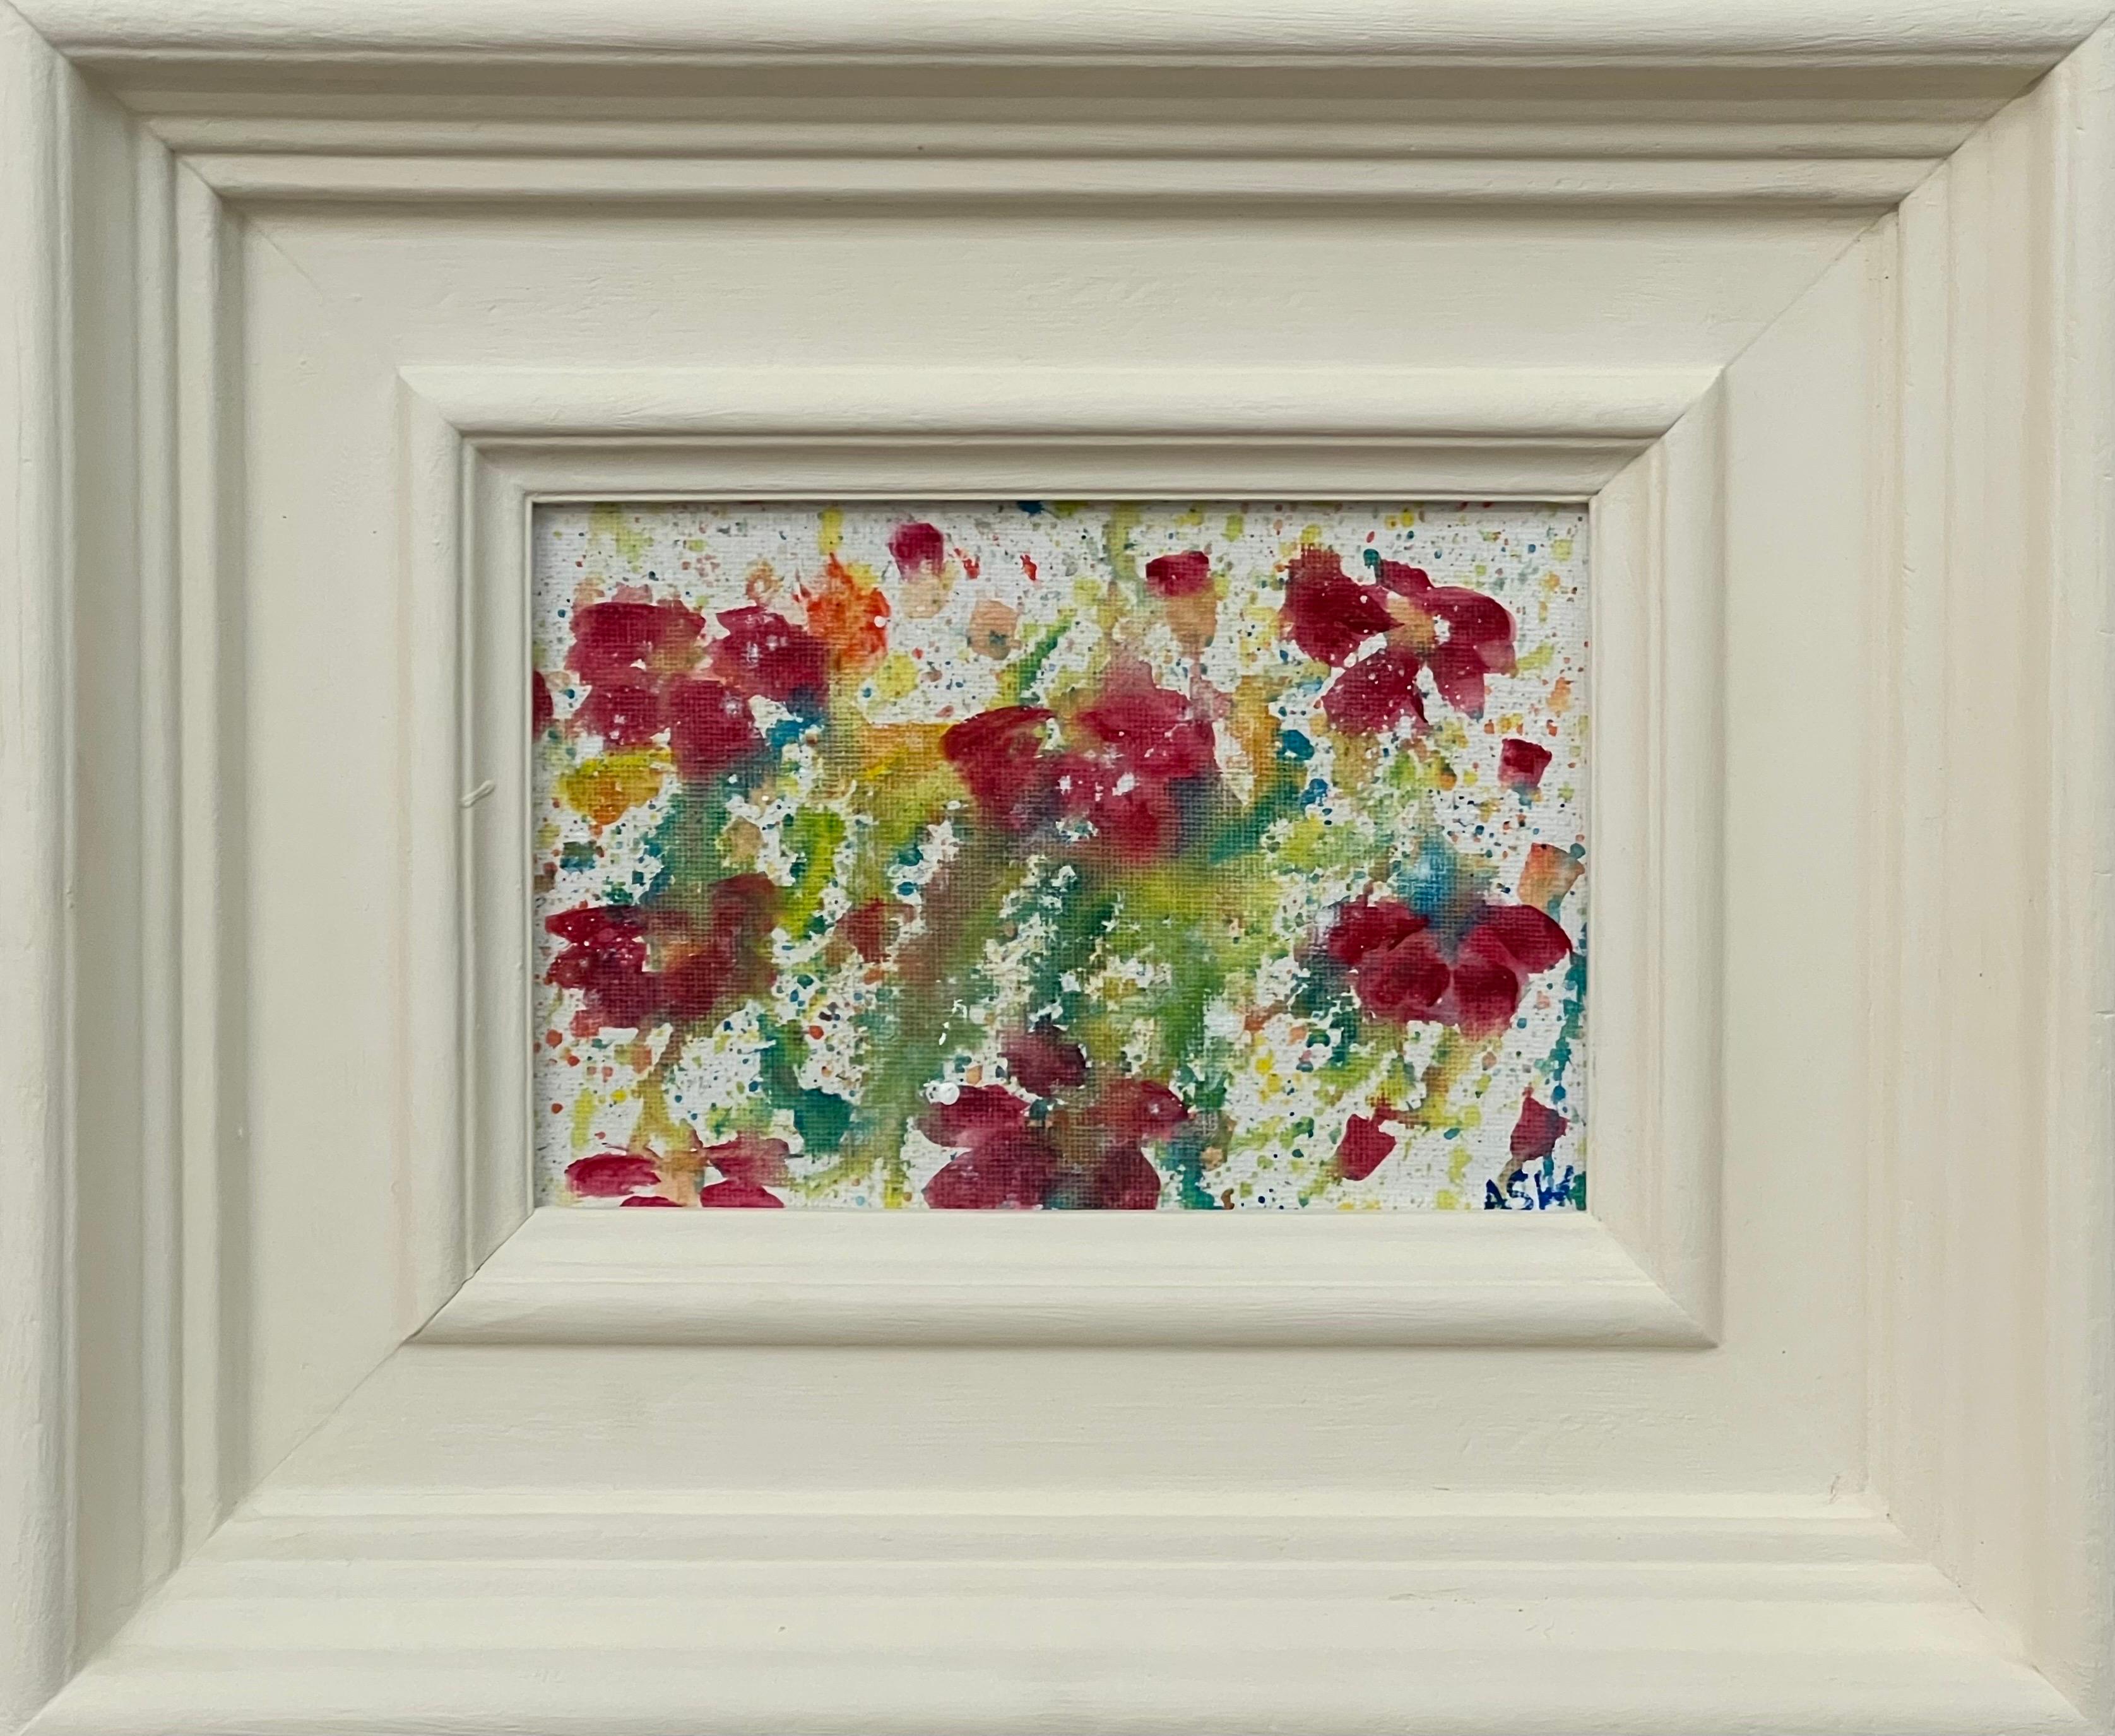 Miniature Abstract Flower Study on White Canvas by Contemporary British Artist